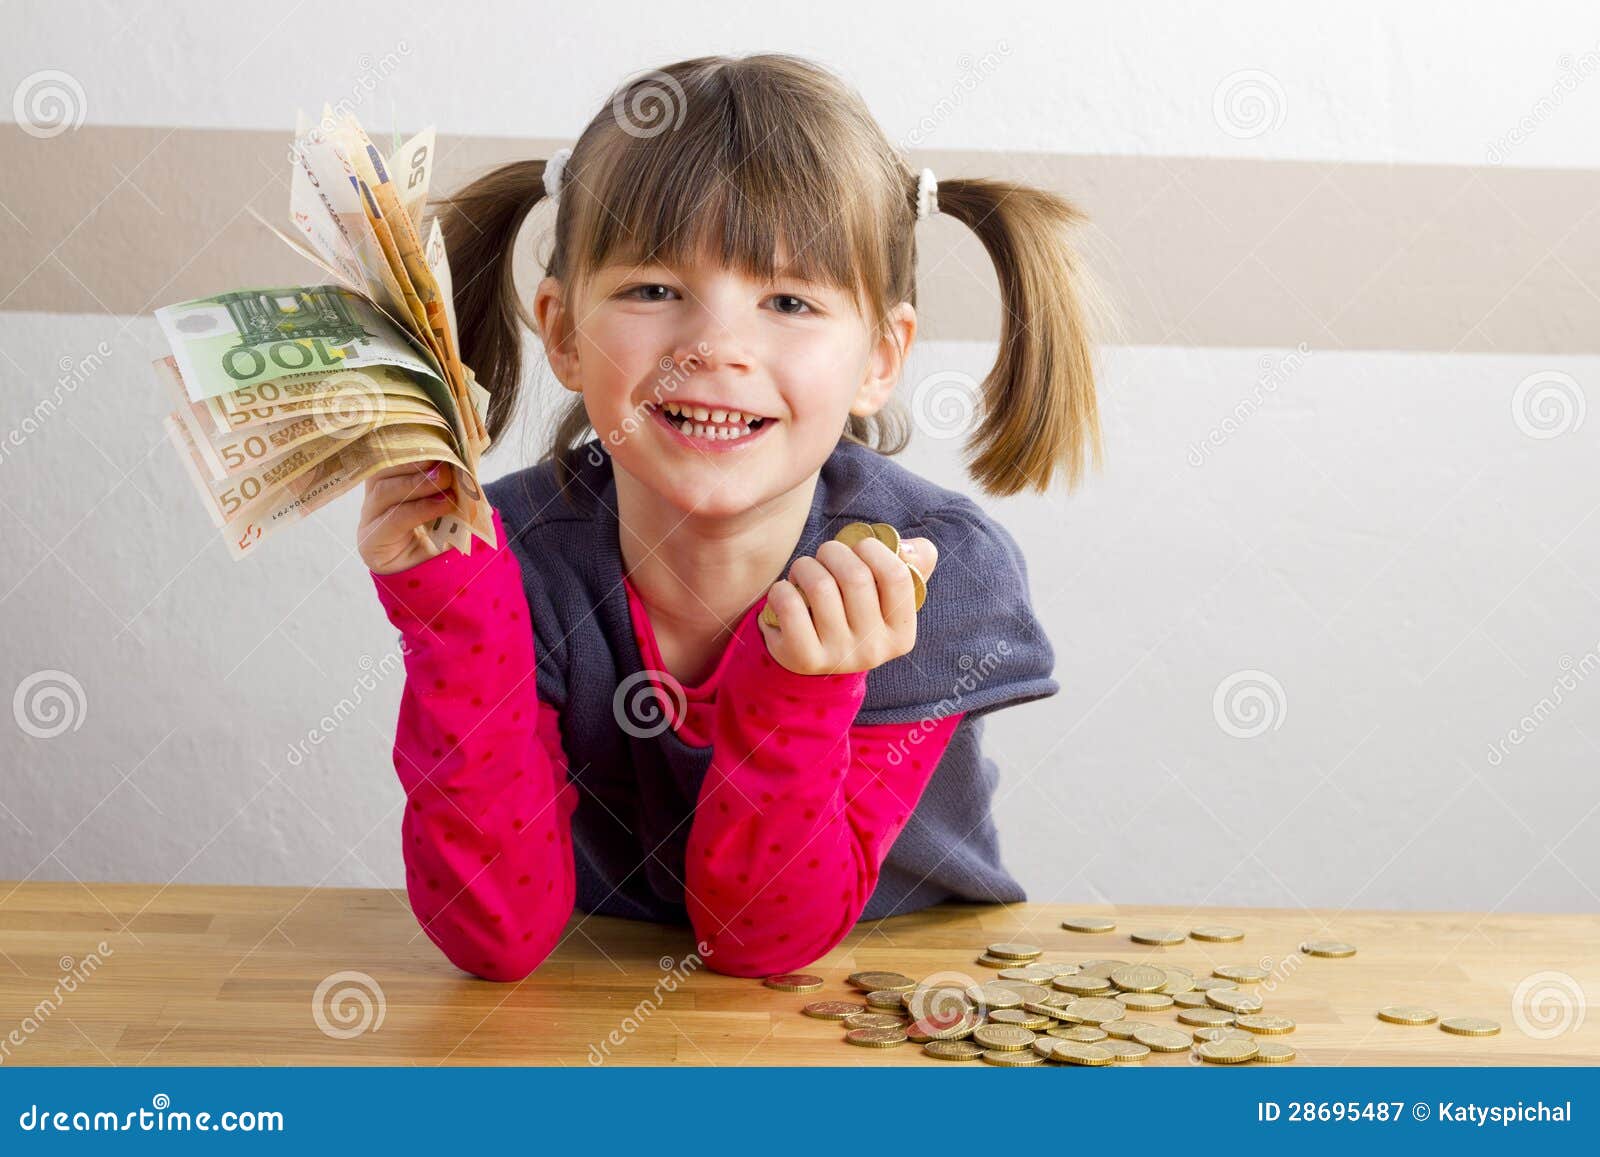 Girl Sitting In Front Of A Lot Of Money Stock Image Image Of Hand